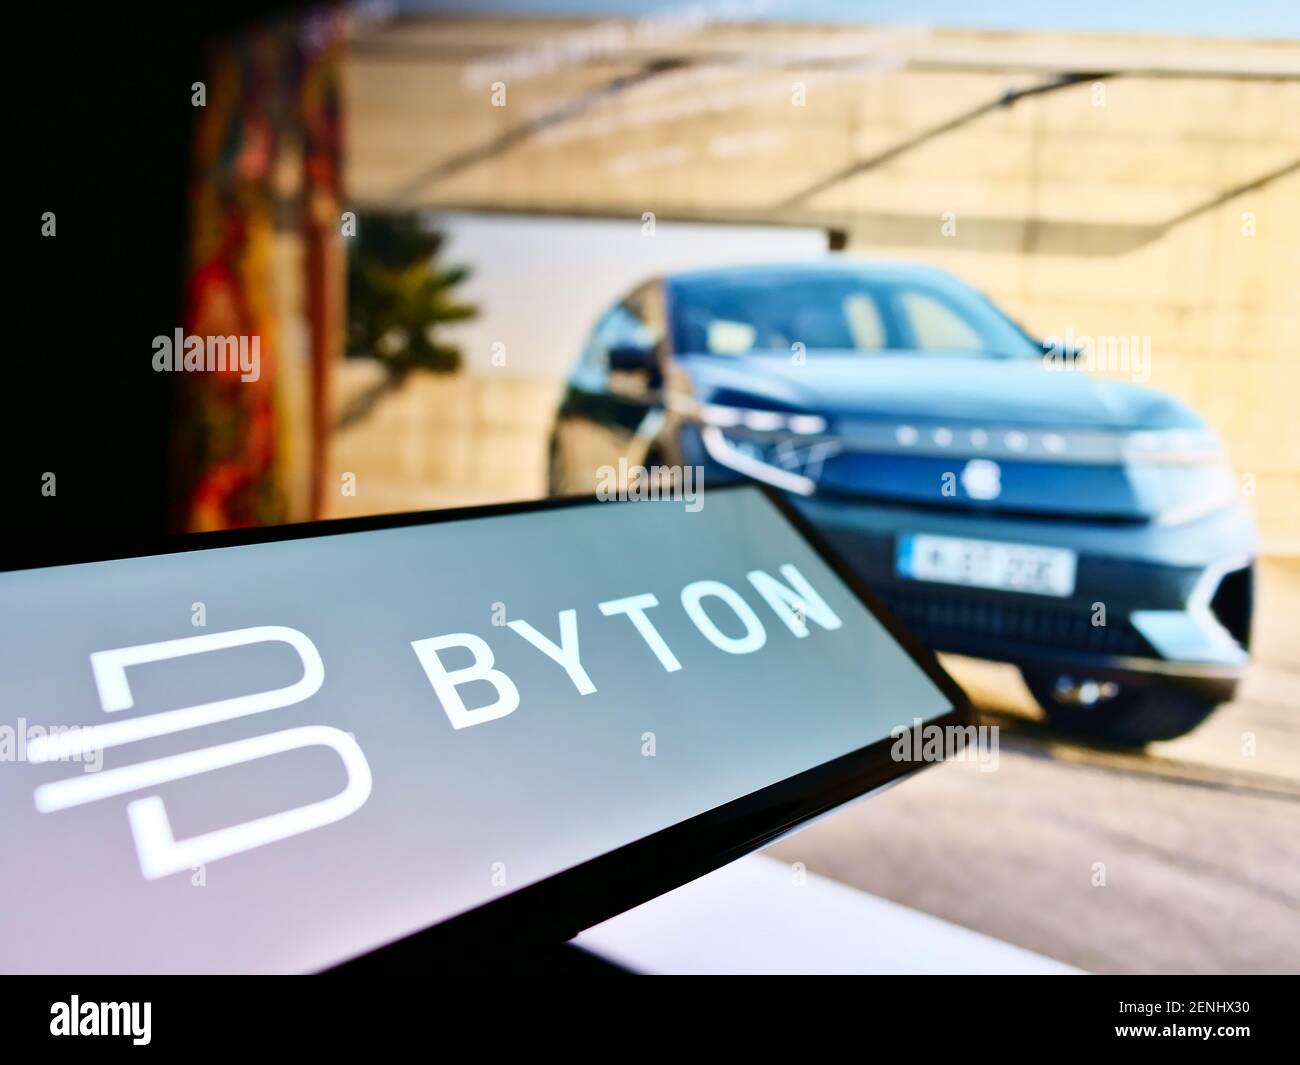 Mobile phone with company logo of Chinese automotive brand Byton (electric vehicle) on screen in front of web page. Focus on center of phone display. Stock Photo